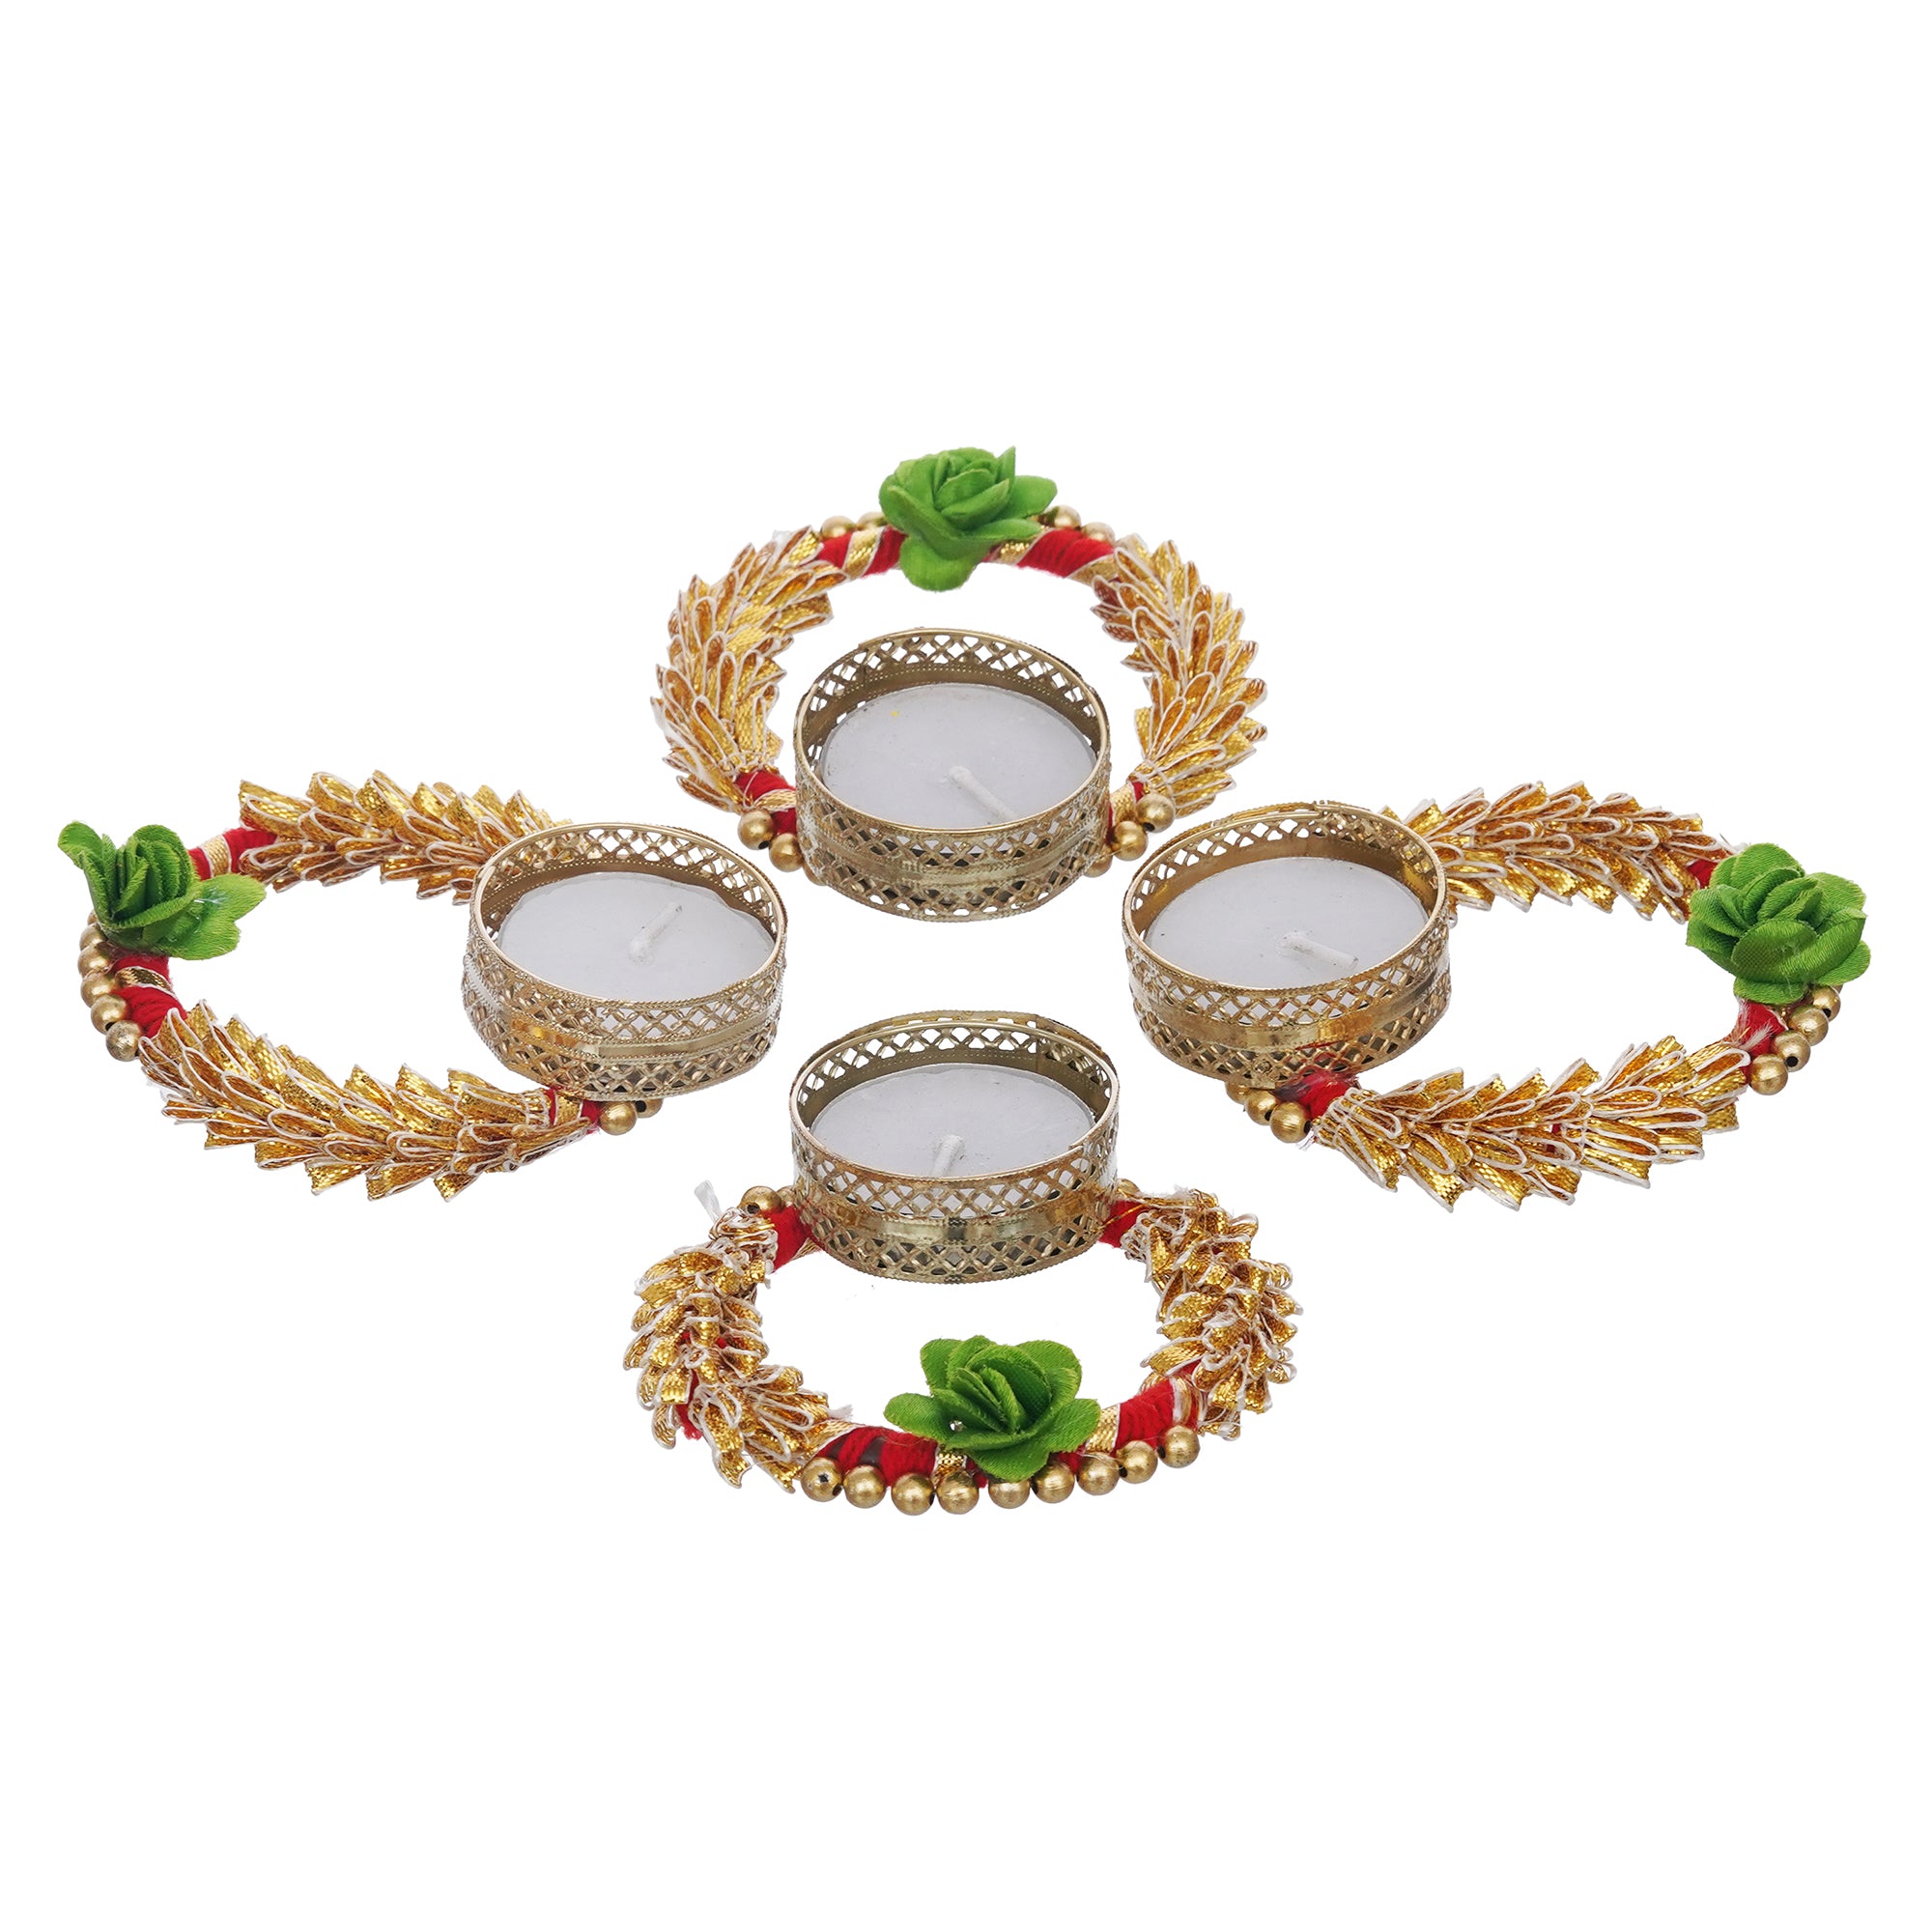 eCraftIndia Set of 4 Green and Golden Round Shaped Floral Decorative Tea Light Candle Holders 7